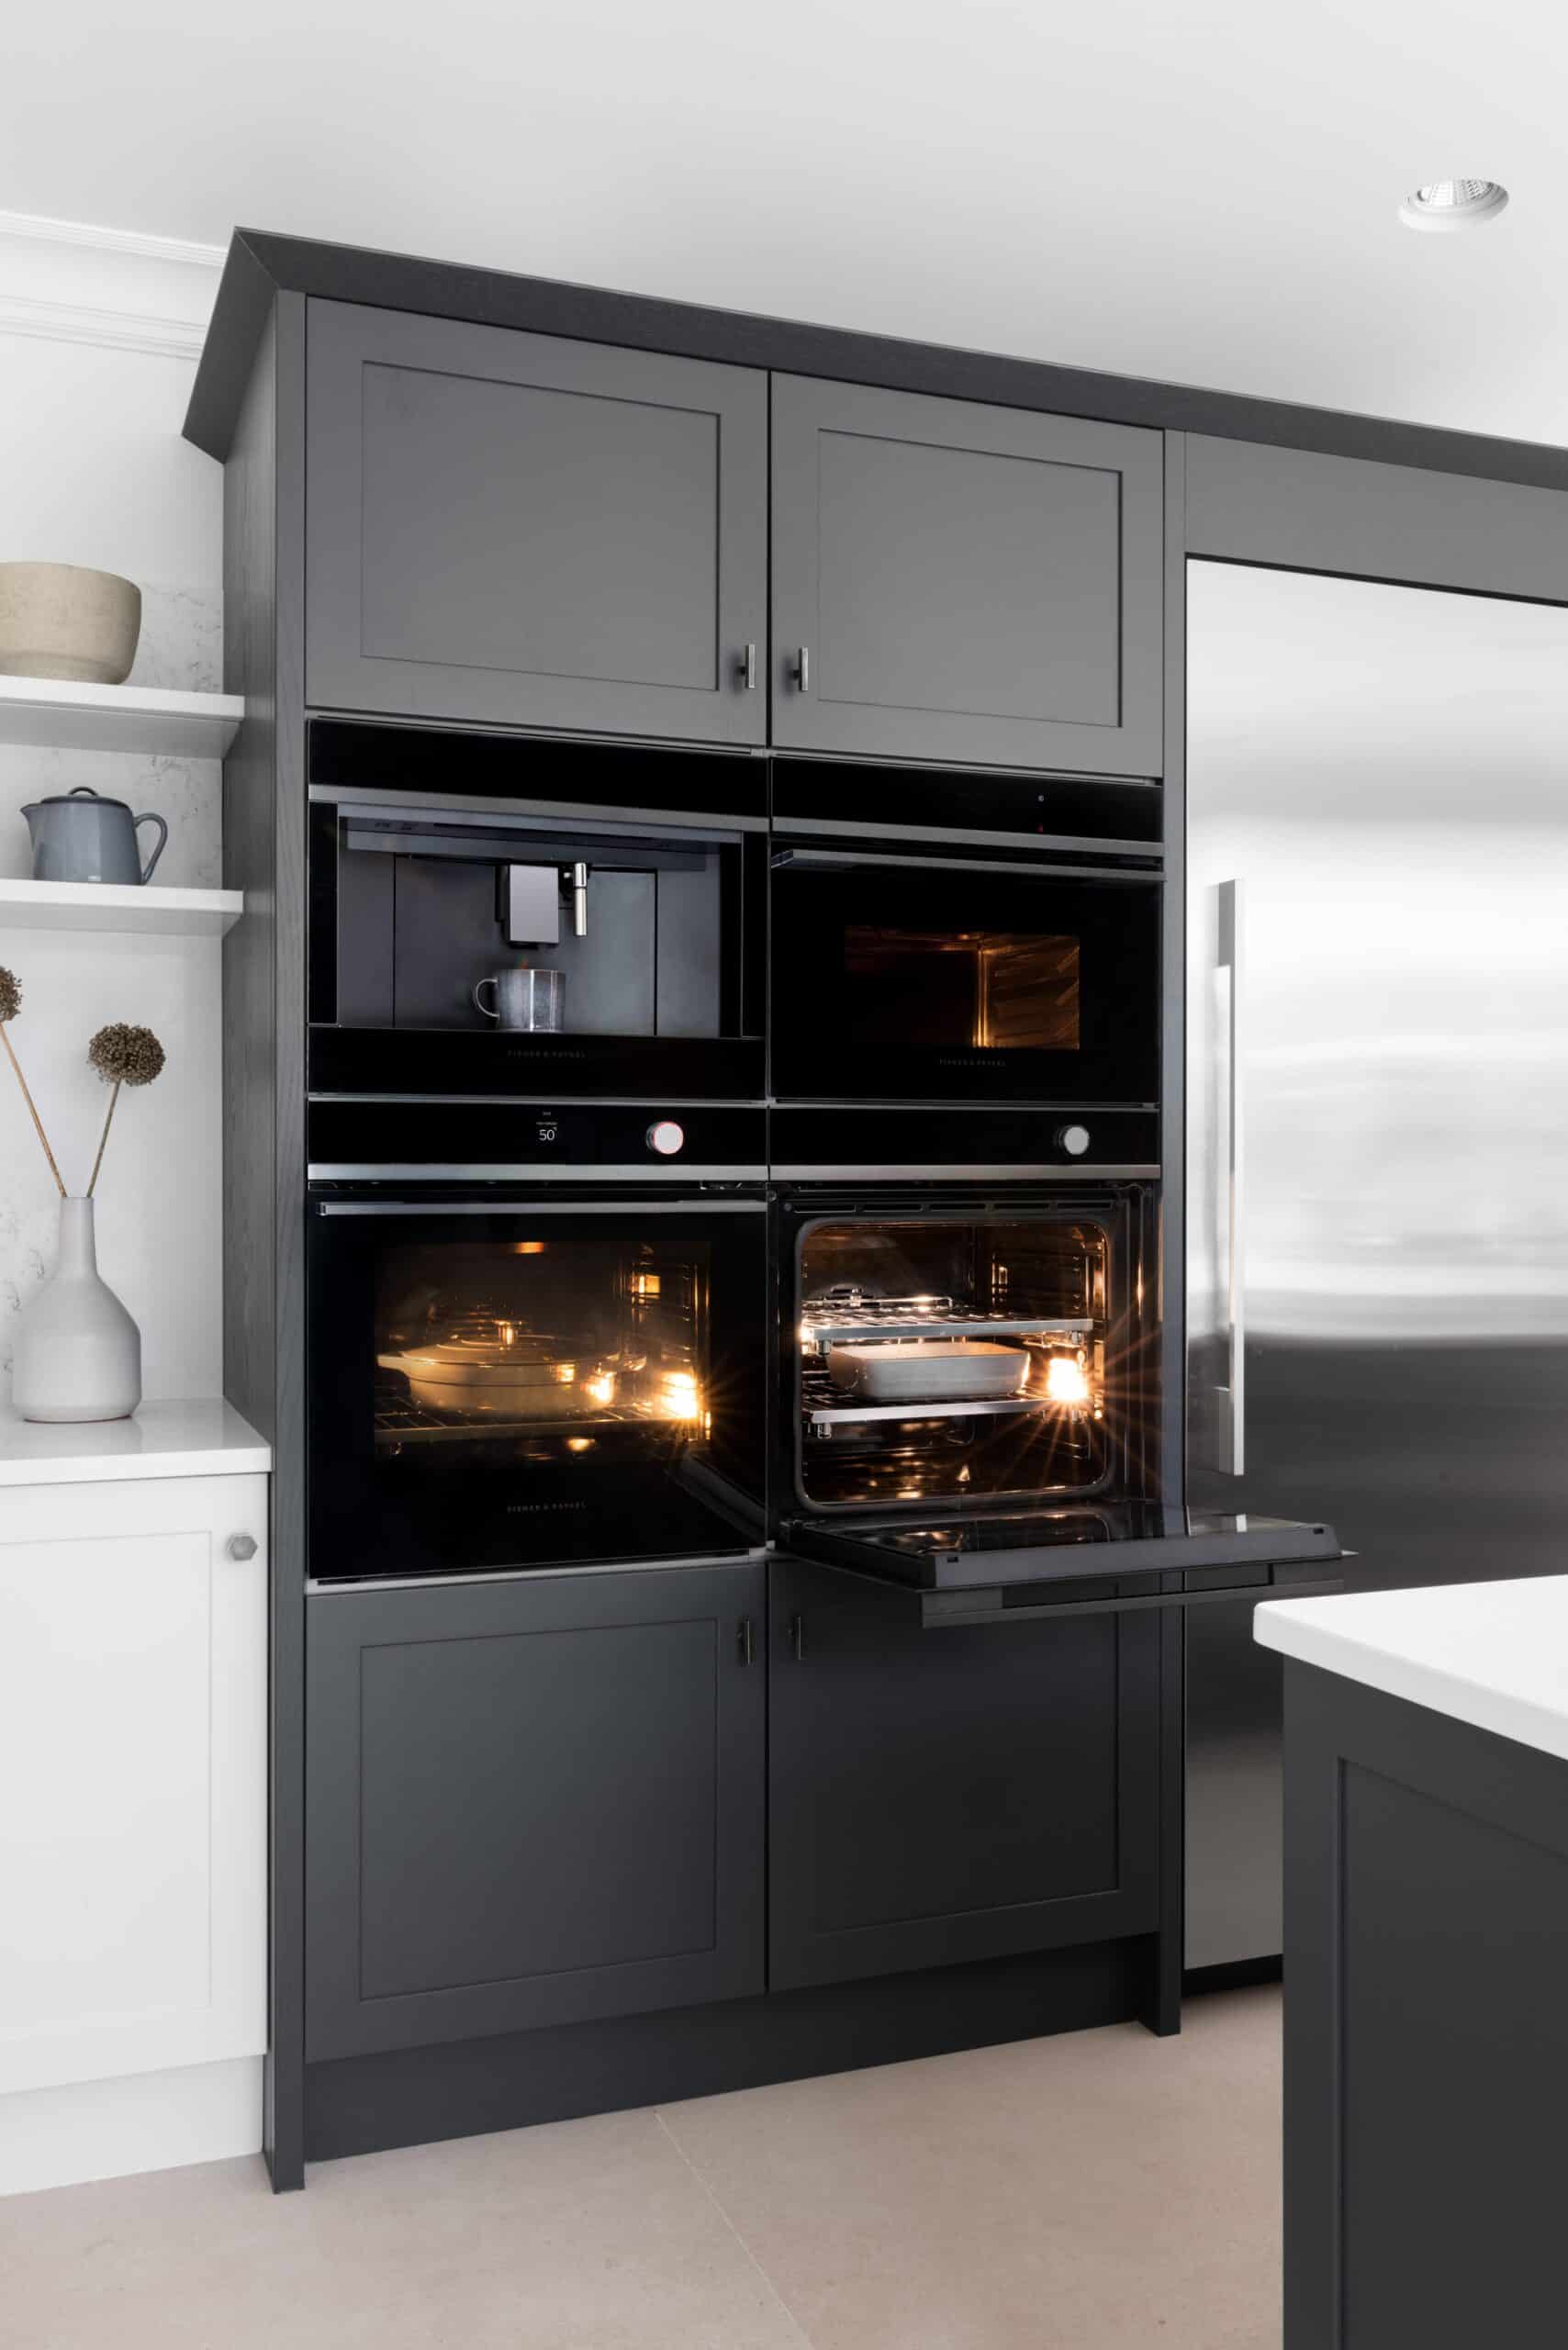 Double built in ovens in black kitchen cabinets